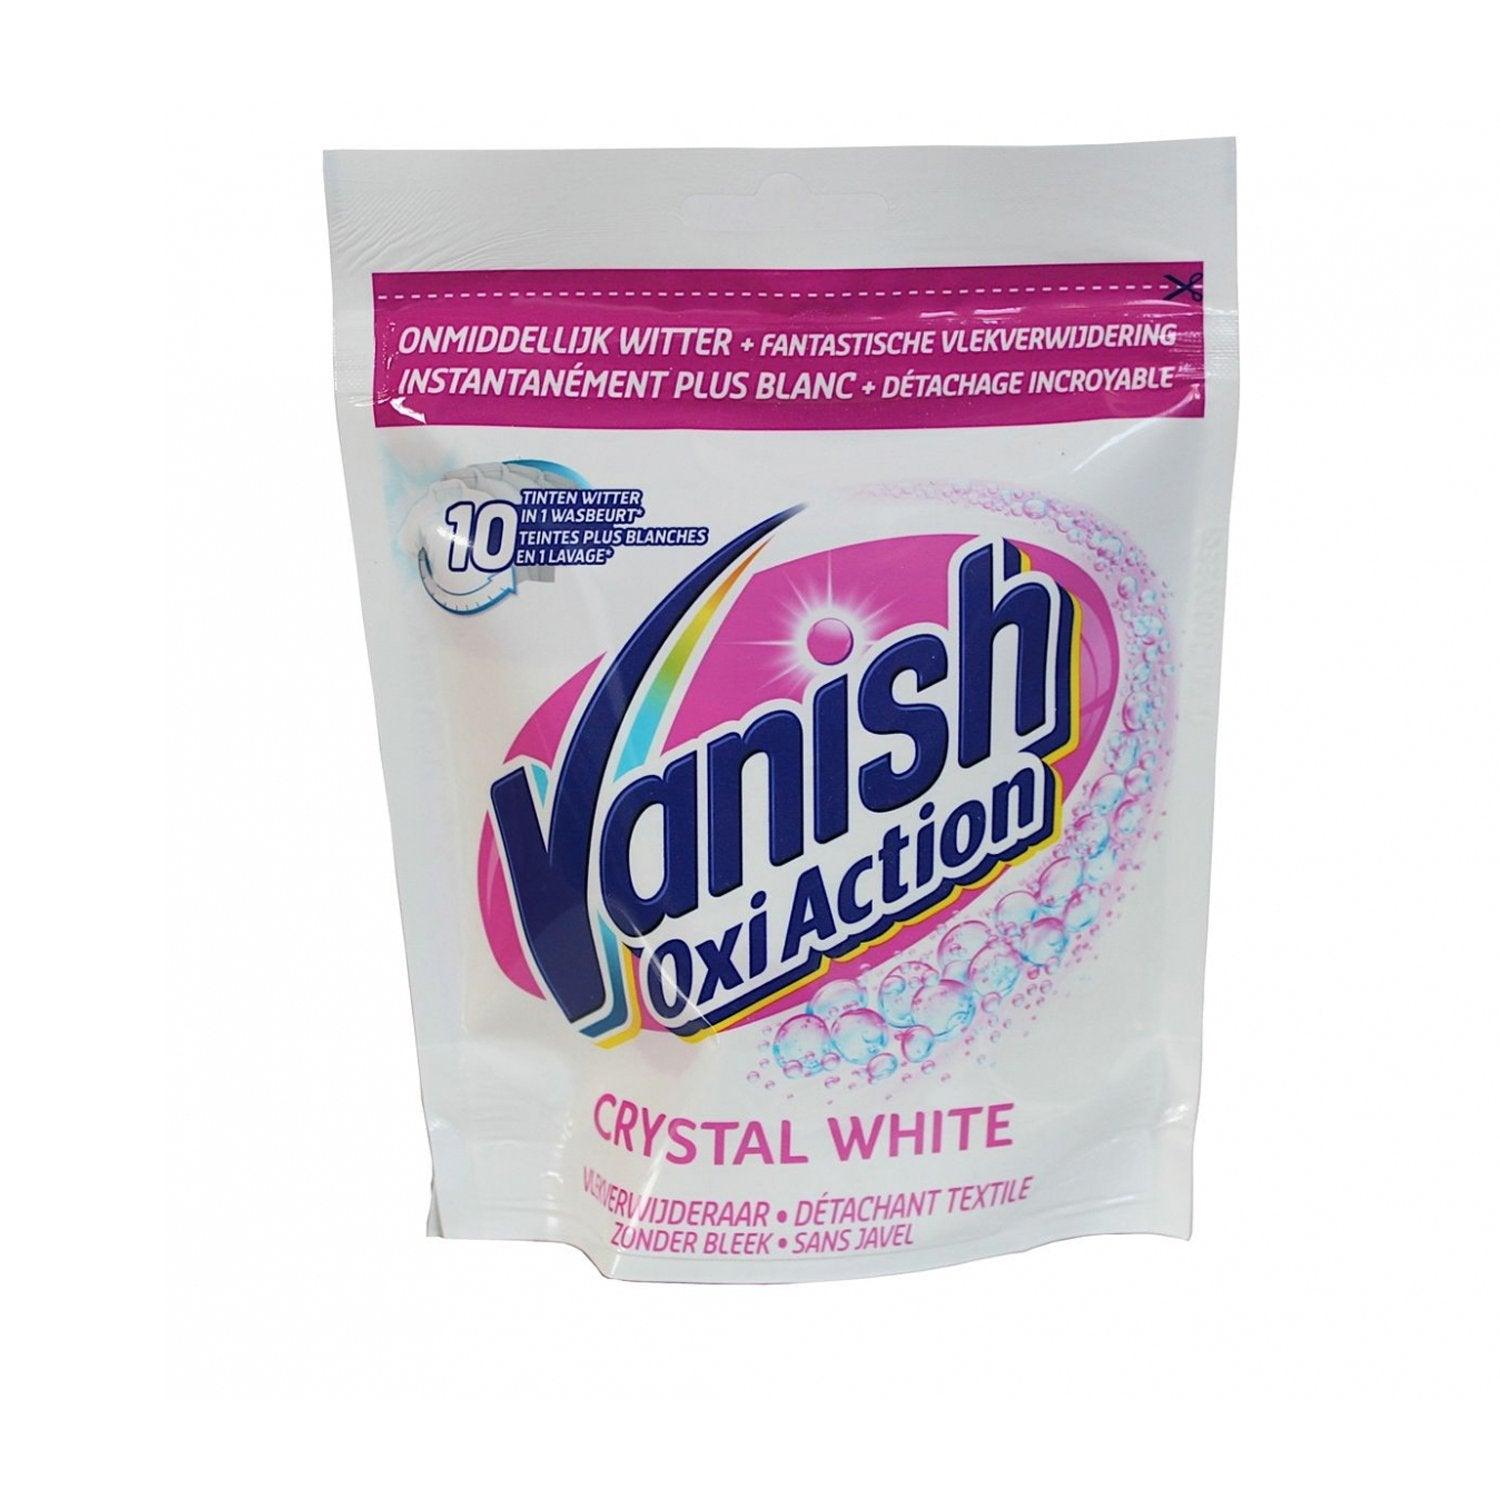 Vanish Oxi Action Powder-crystal White (import) 275g - Vending Superstore